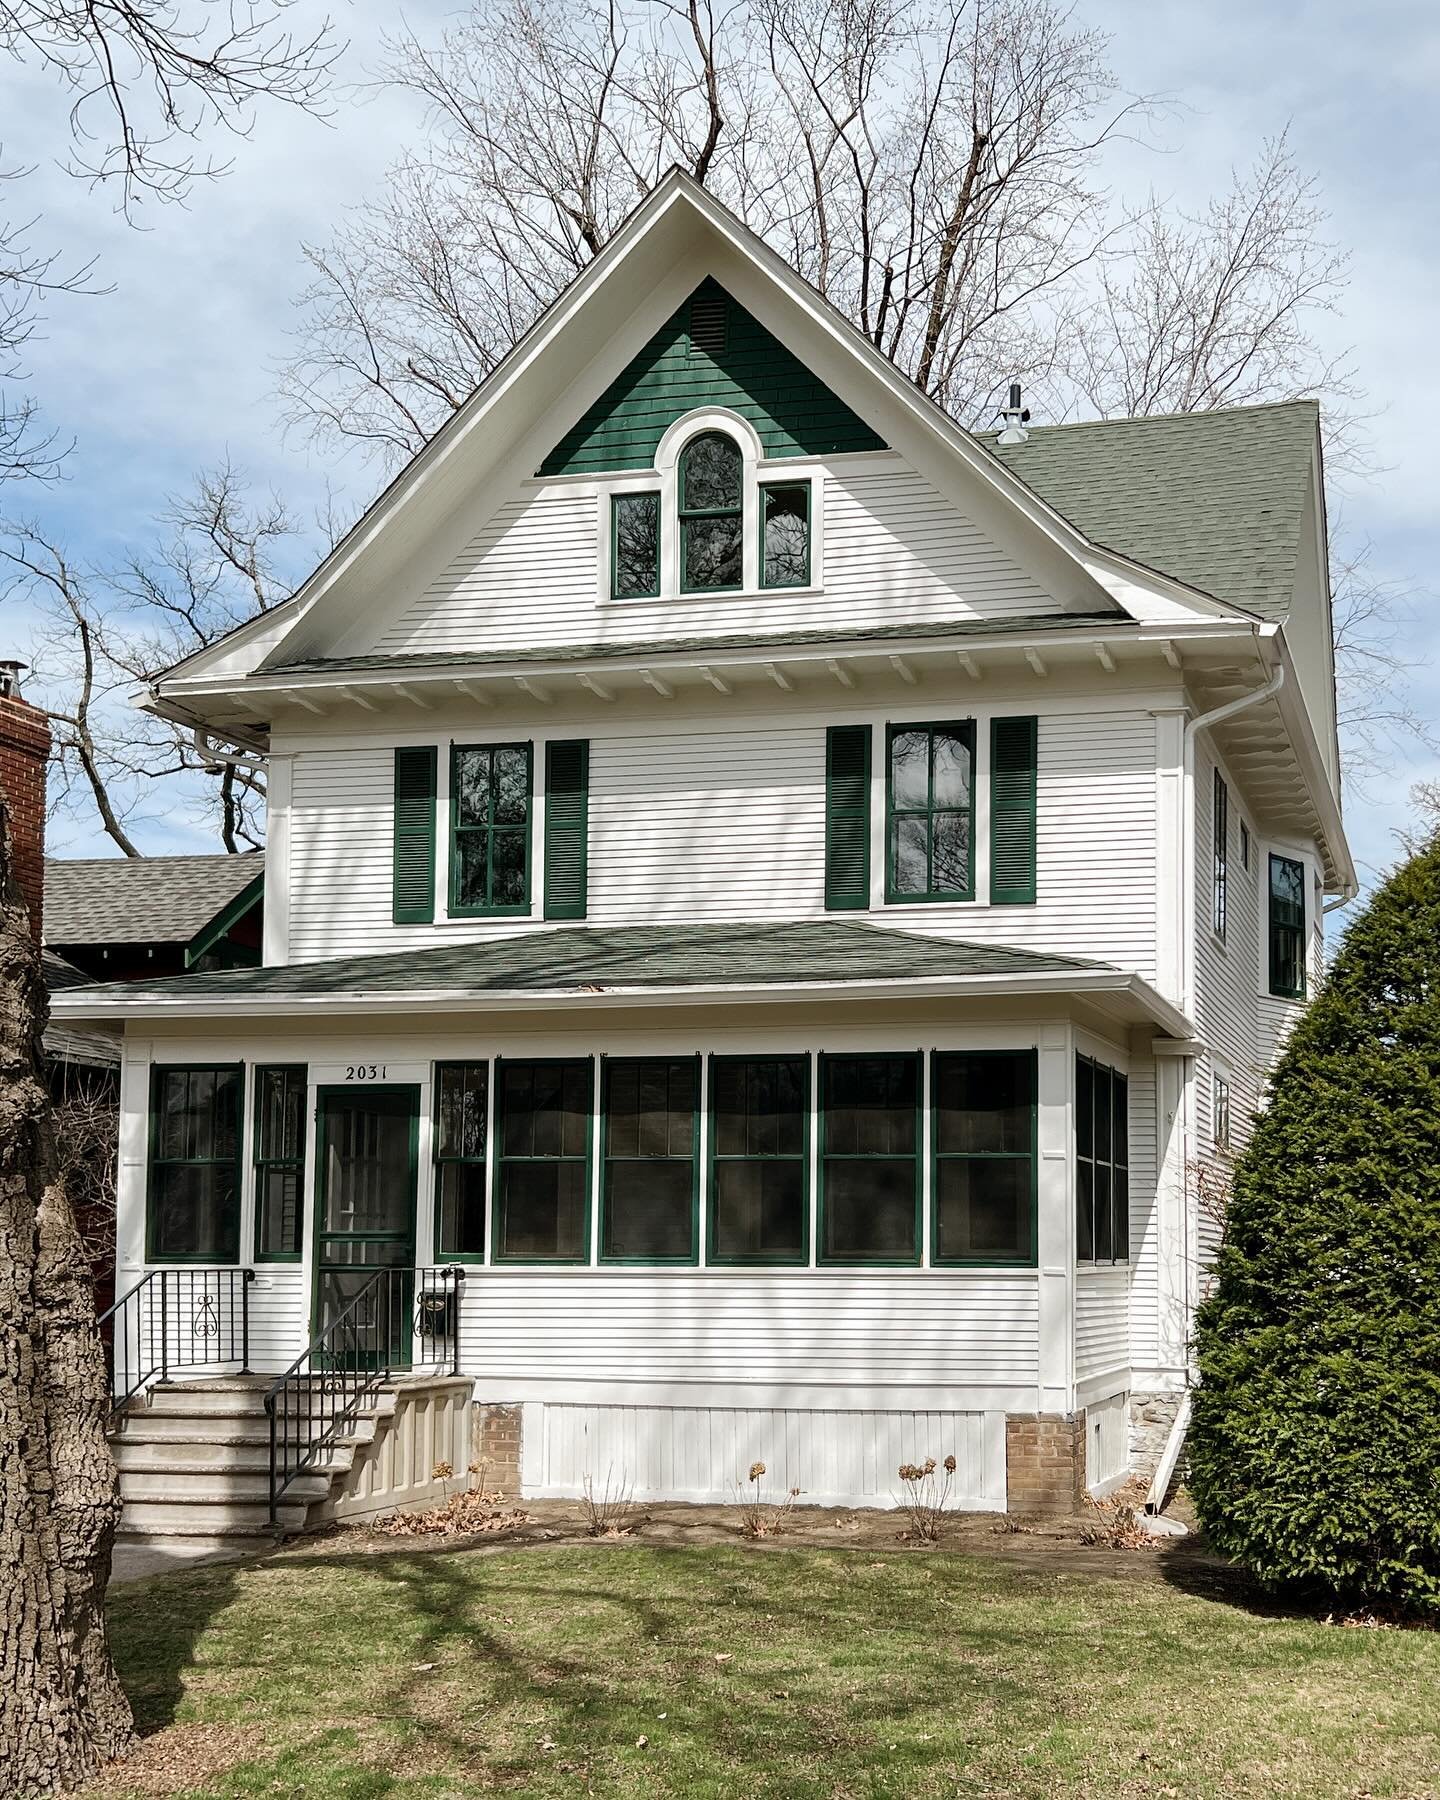 Quite the lovely renovation done on this 1901 American Foursquare. Its ready to add your own personality. Wallpaper and art is all I&rsquo;d add to this home.

Interested in finding your own home to love? Fill out my &lsquo;buy with me&rsquo; contact